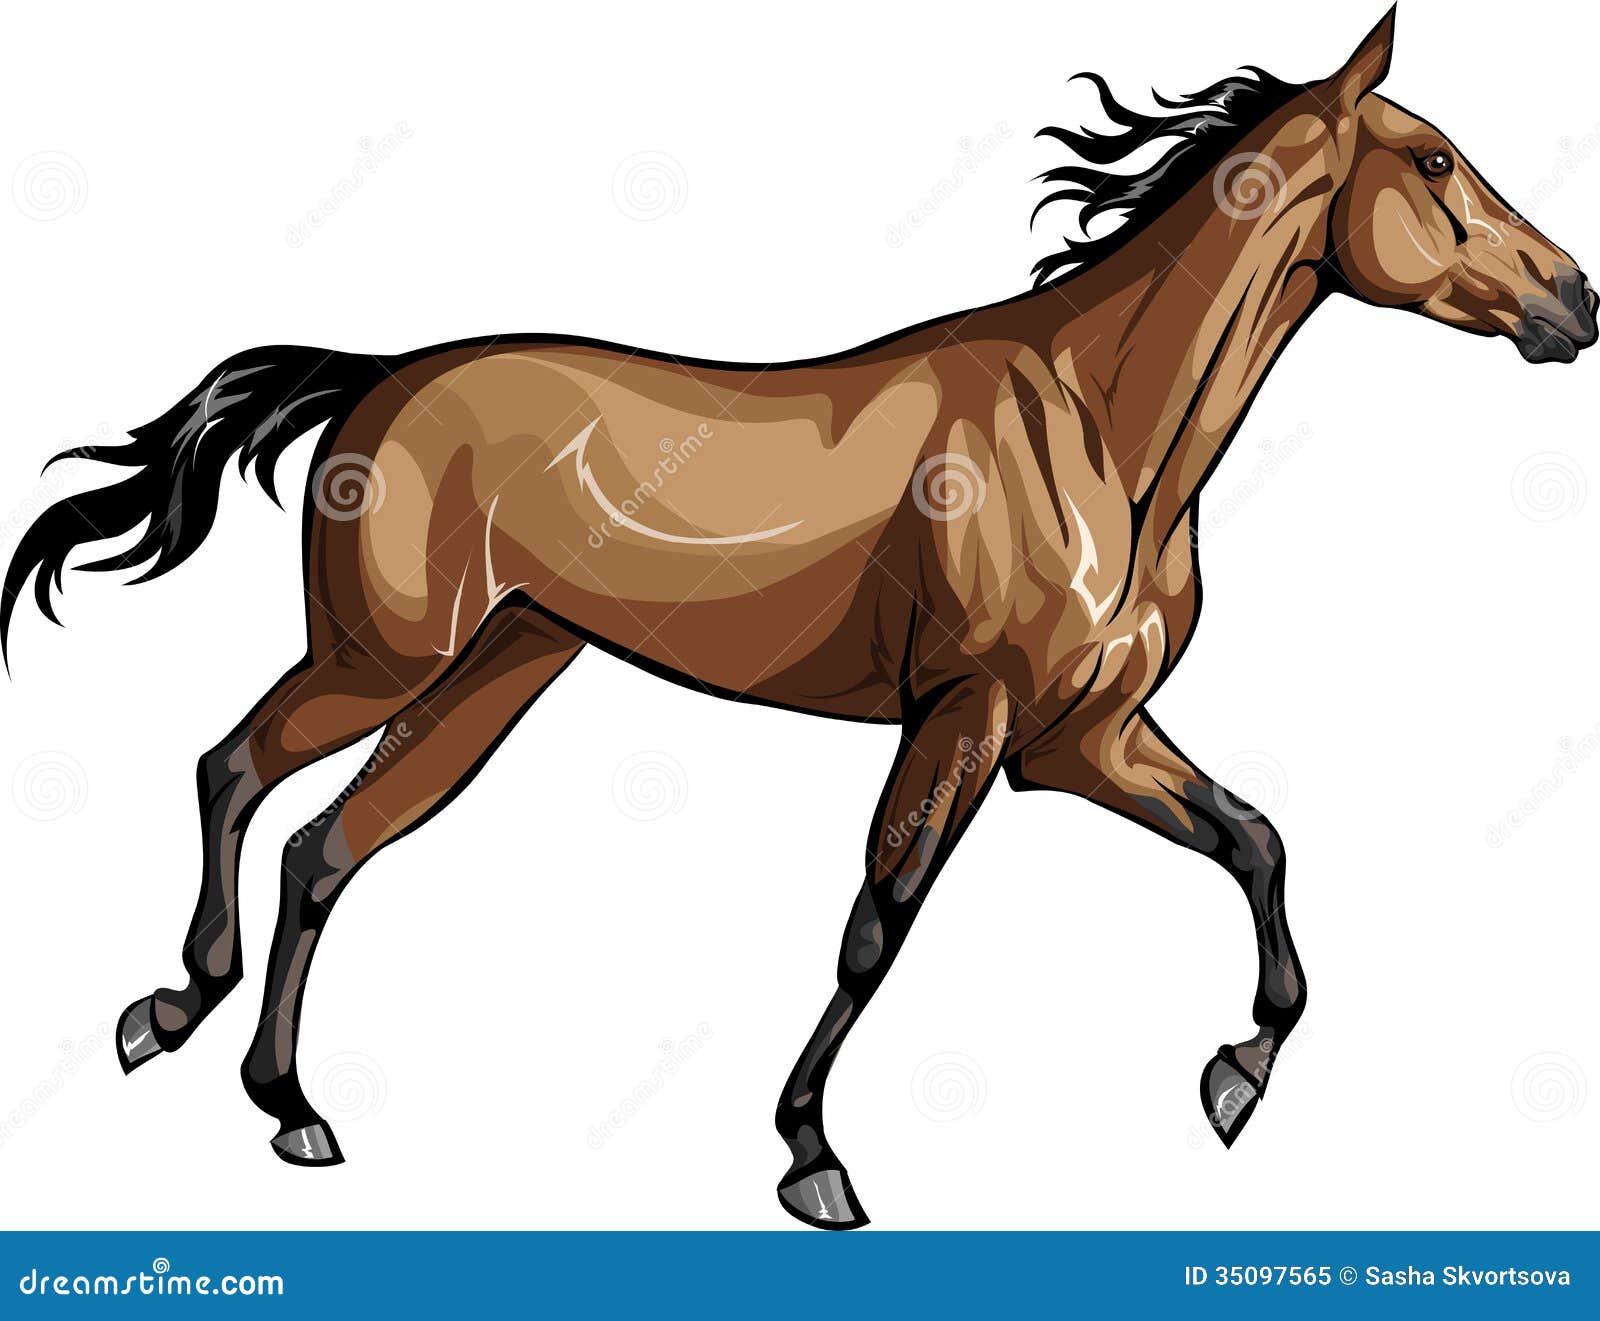 clipart horse racing - photo #48